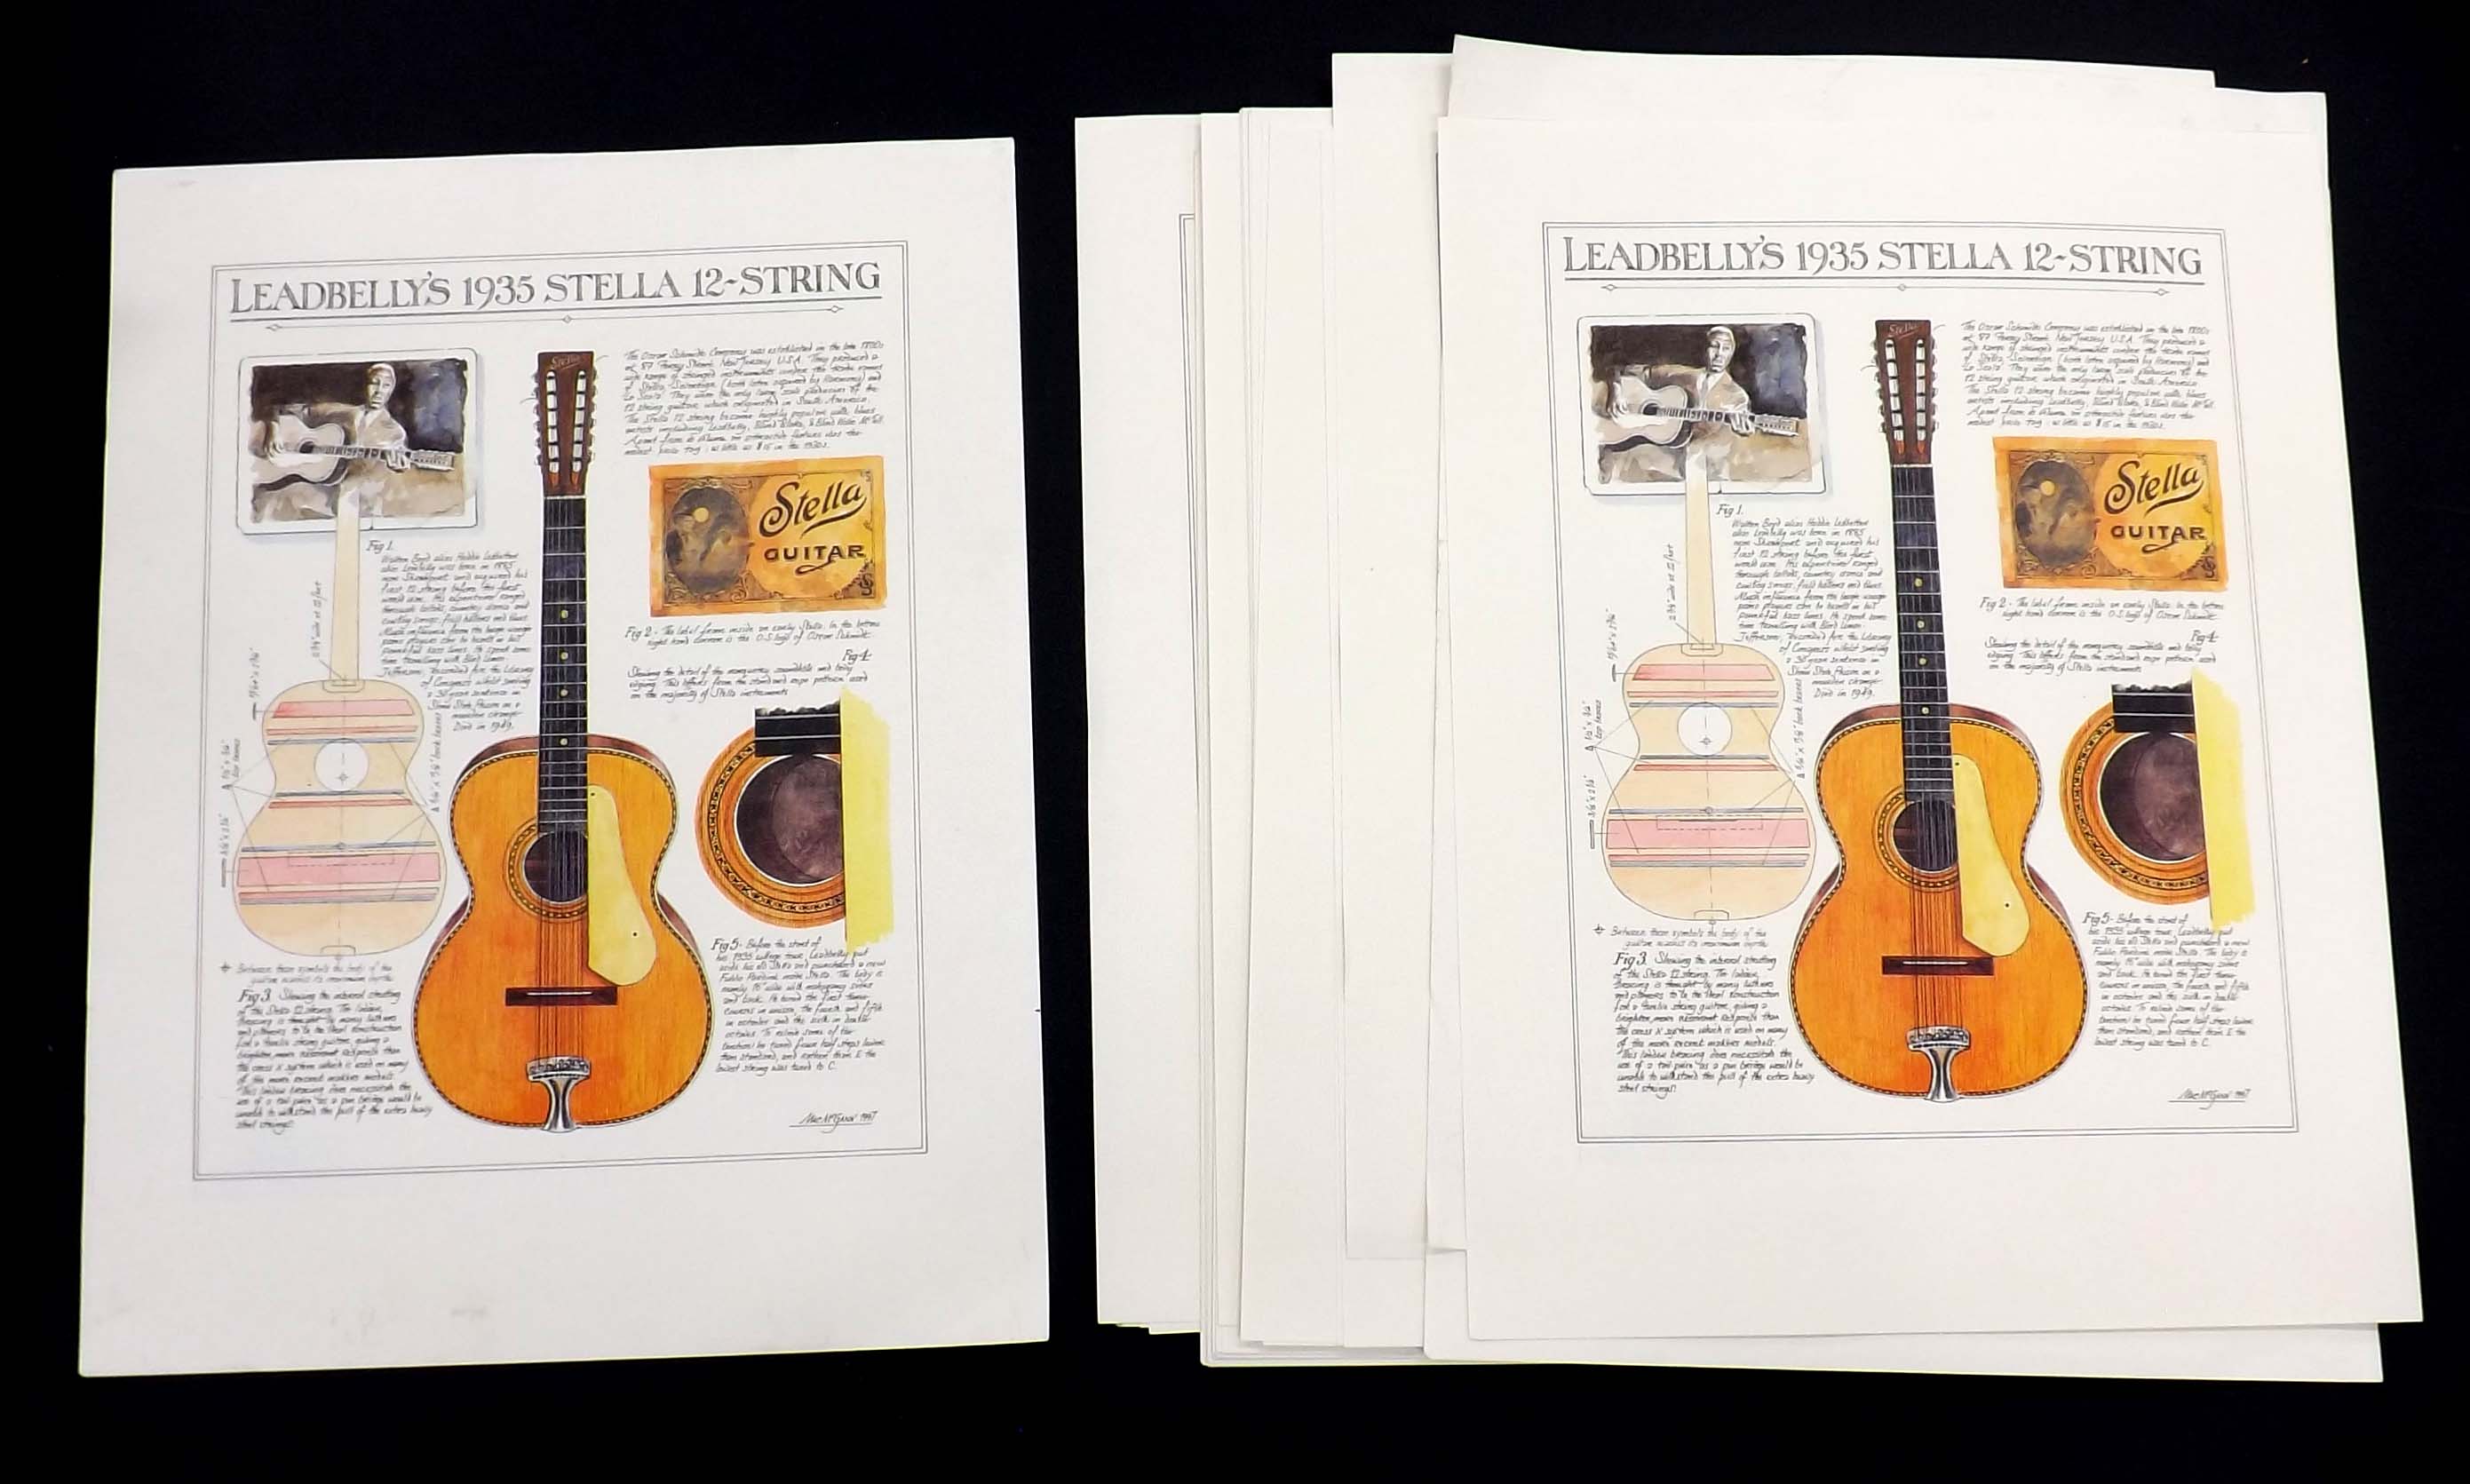 Large quantity of 'Leadbelly's' 1935 Stella 12-strings' posters, 23.25" x 17.75"